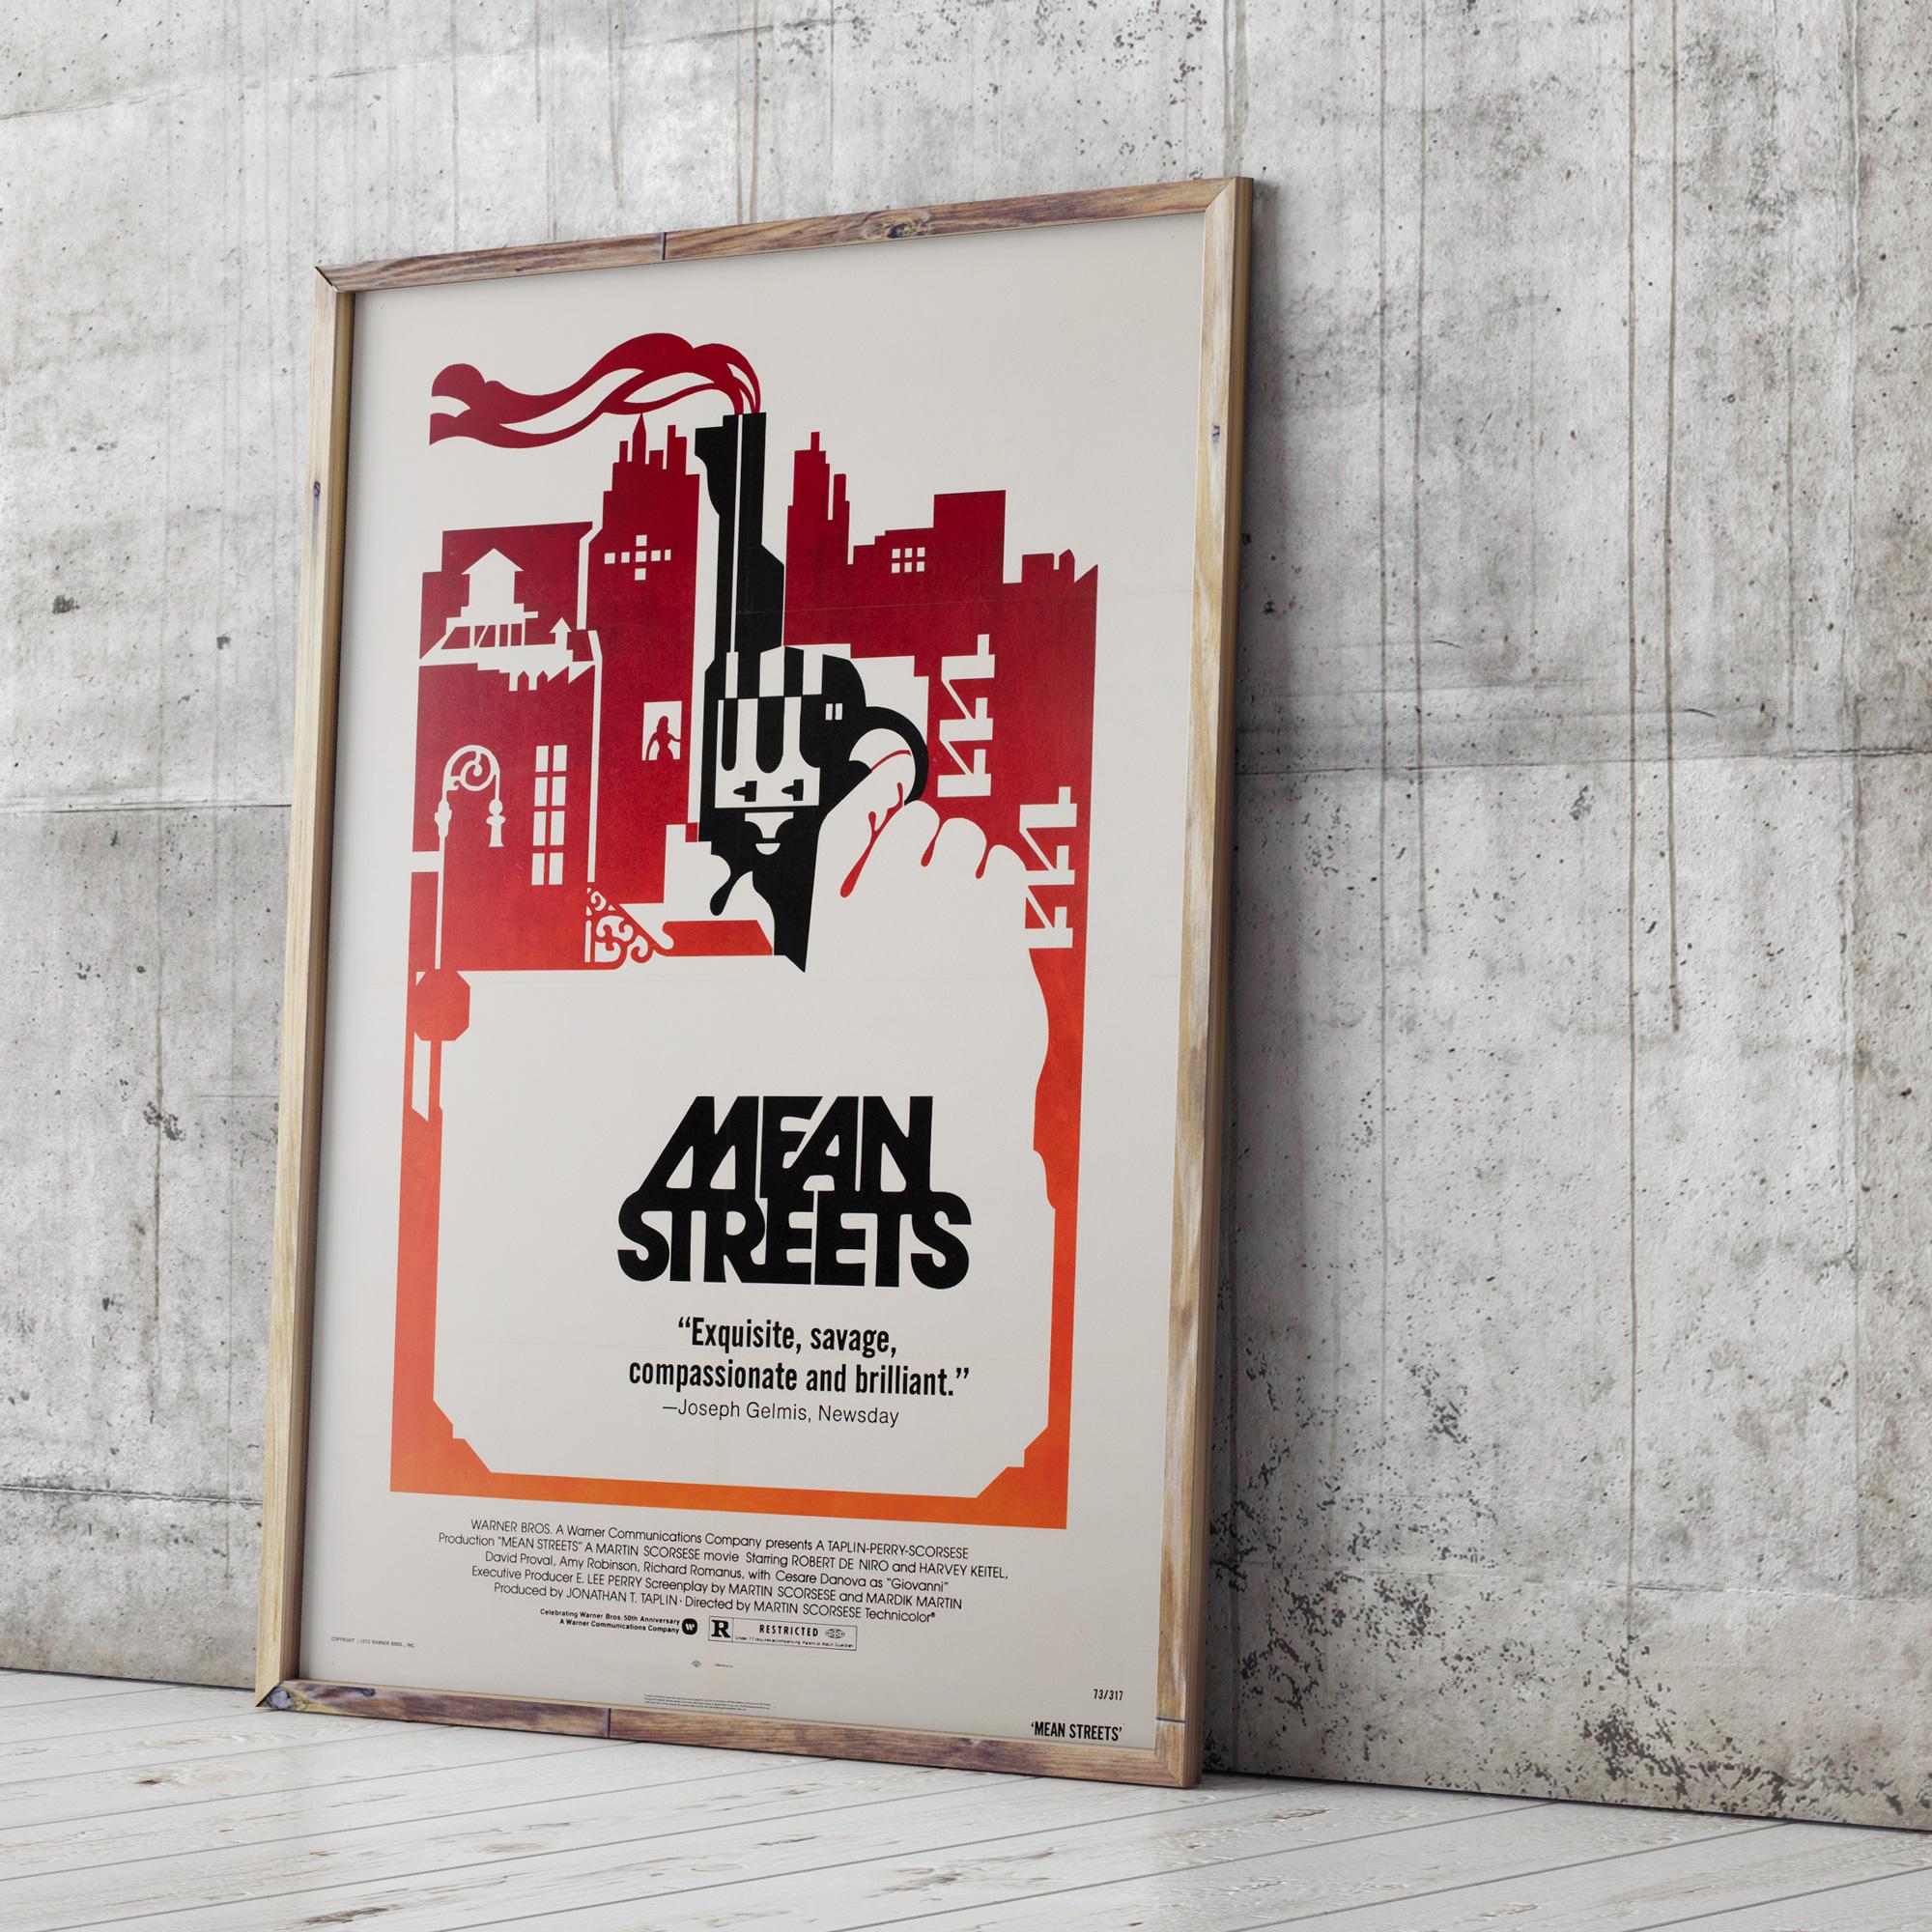 Stunning artwork features on this rare US 1 Sheet film poster for Scorsese's gritty New York crime drama Mean Streets. The best artwork for the title.

This original vintage movie poster has been professionally cleaned, de-acidified and